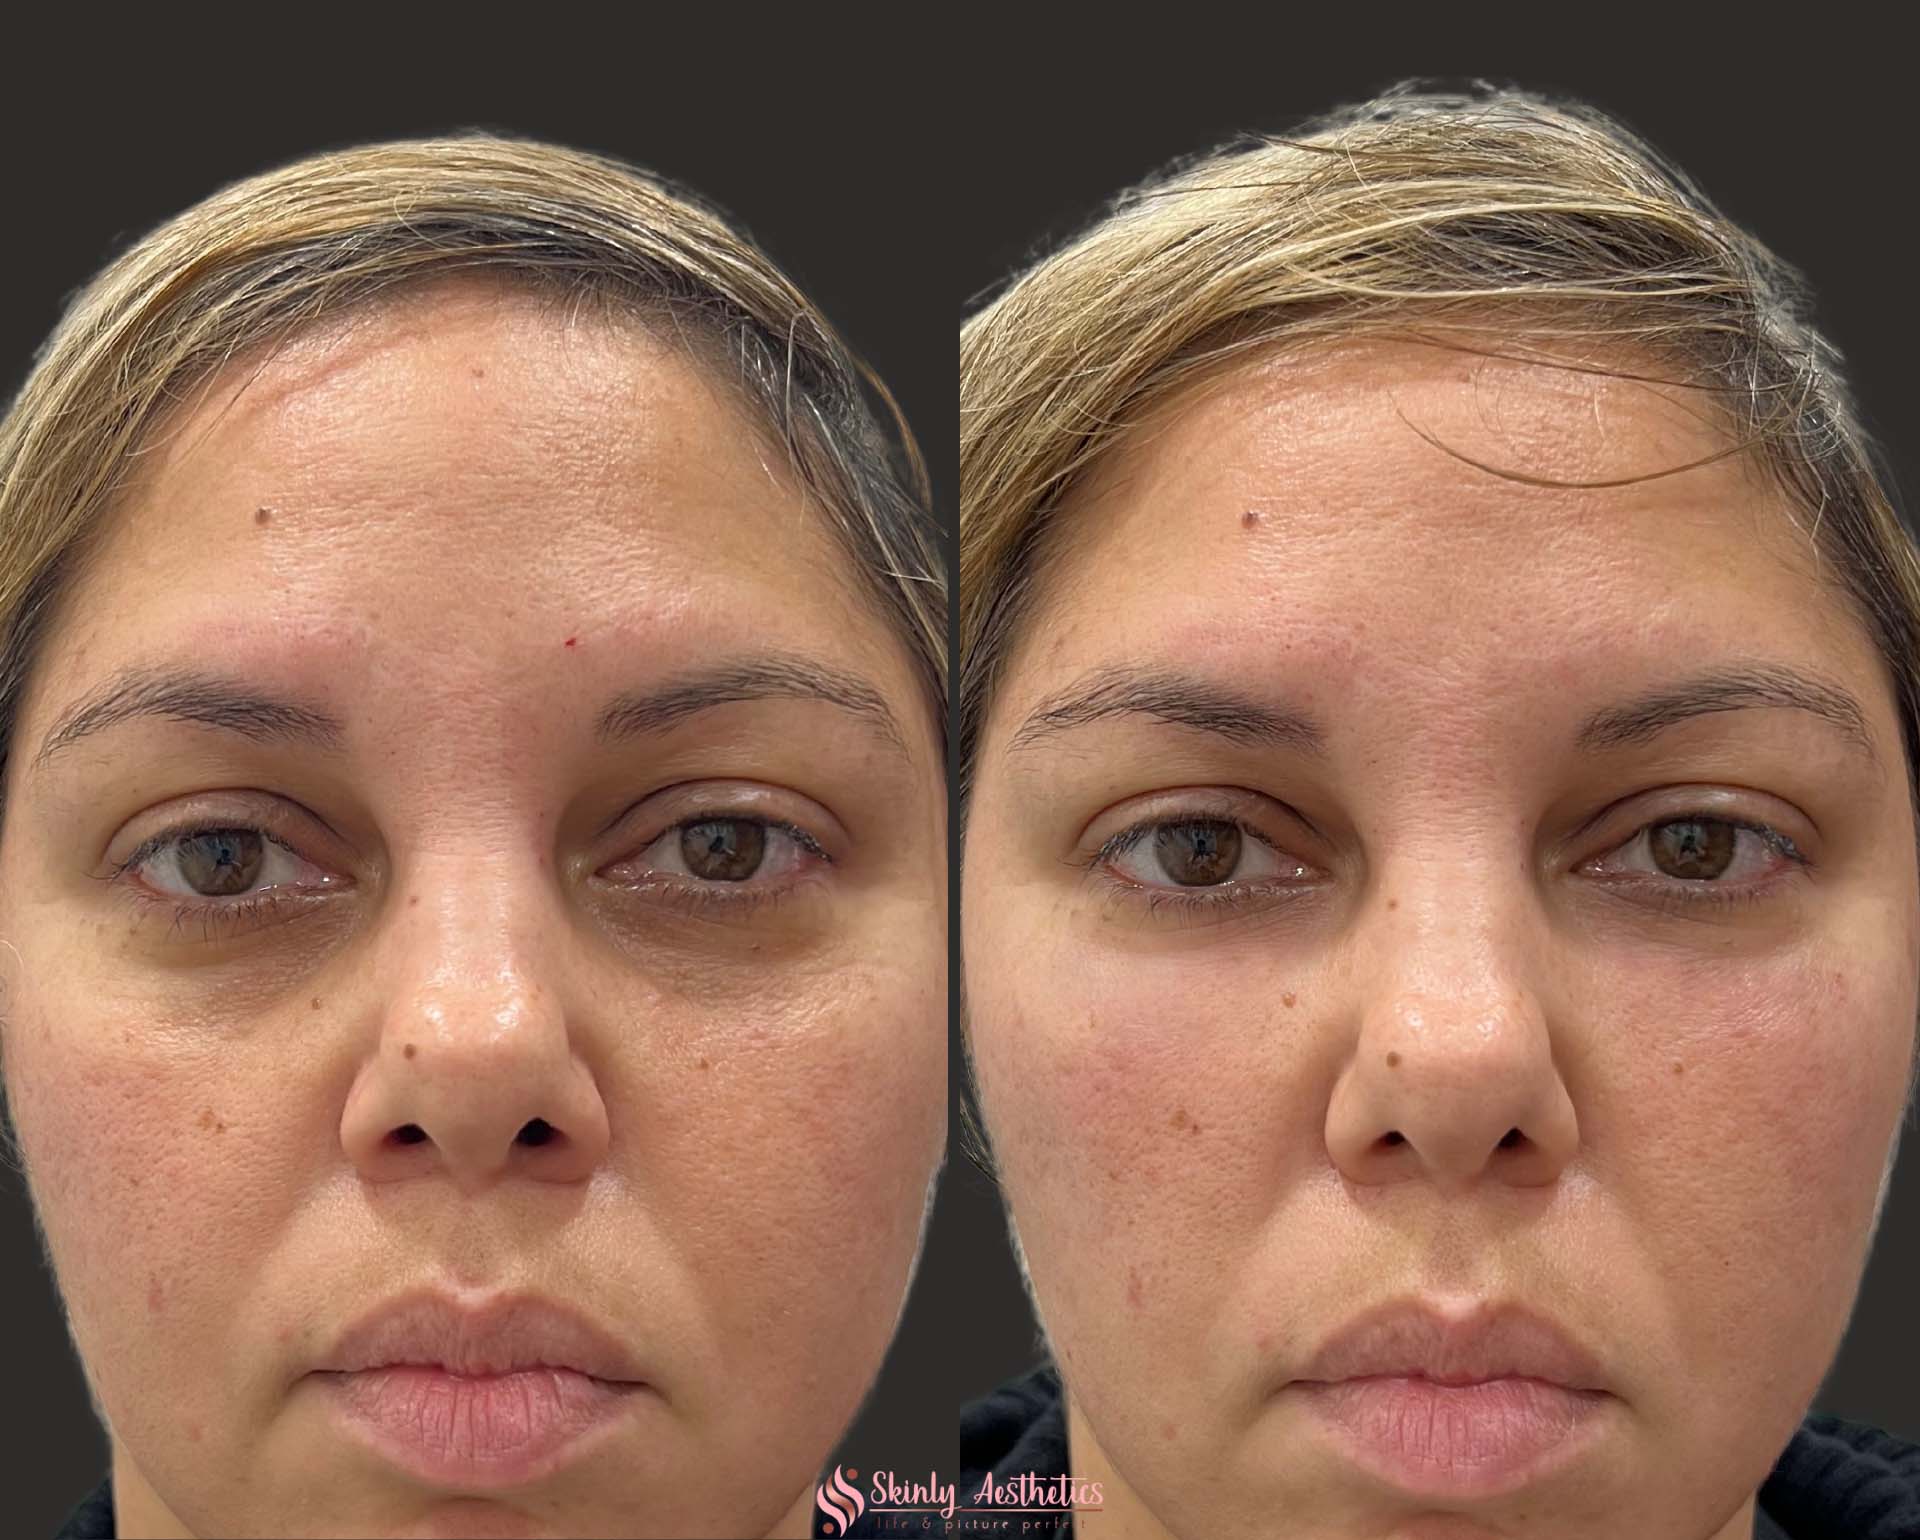 before and after results showing correction of deep under eye circles after injection with Restylane dermal filler